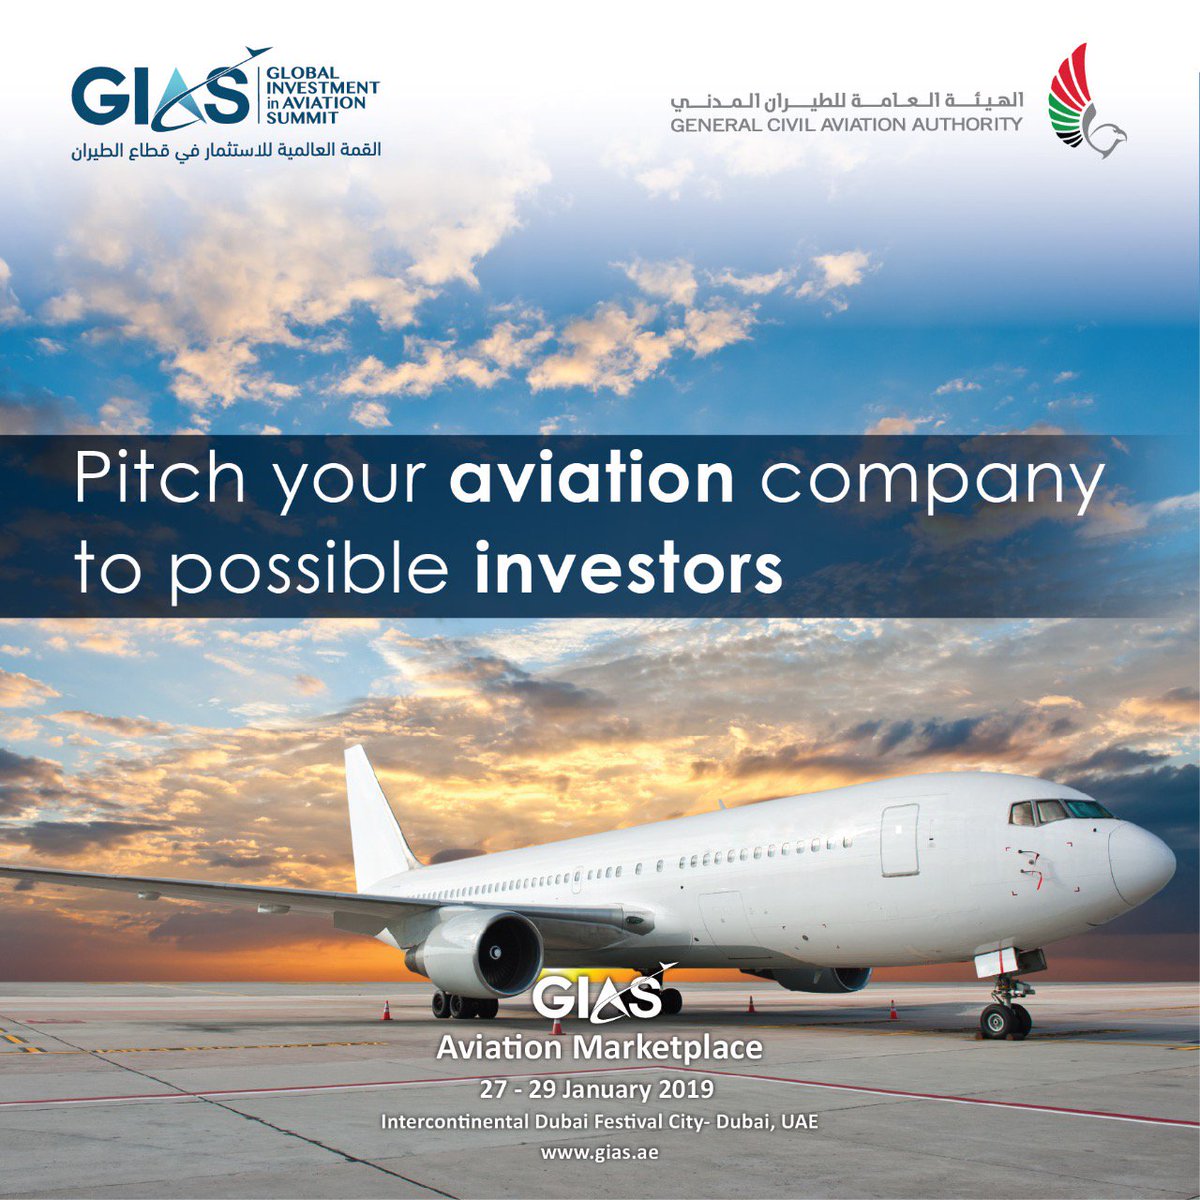 Pitch your aviation company to possible investors. Submit your project now at gias.ae #aviation #aircraft #global #investment #investor #business #Network #opportunity #expand #startup #UAE #GIAS19 #grow #aviationmarket #avgeek #dubai #finance #innovator